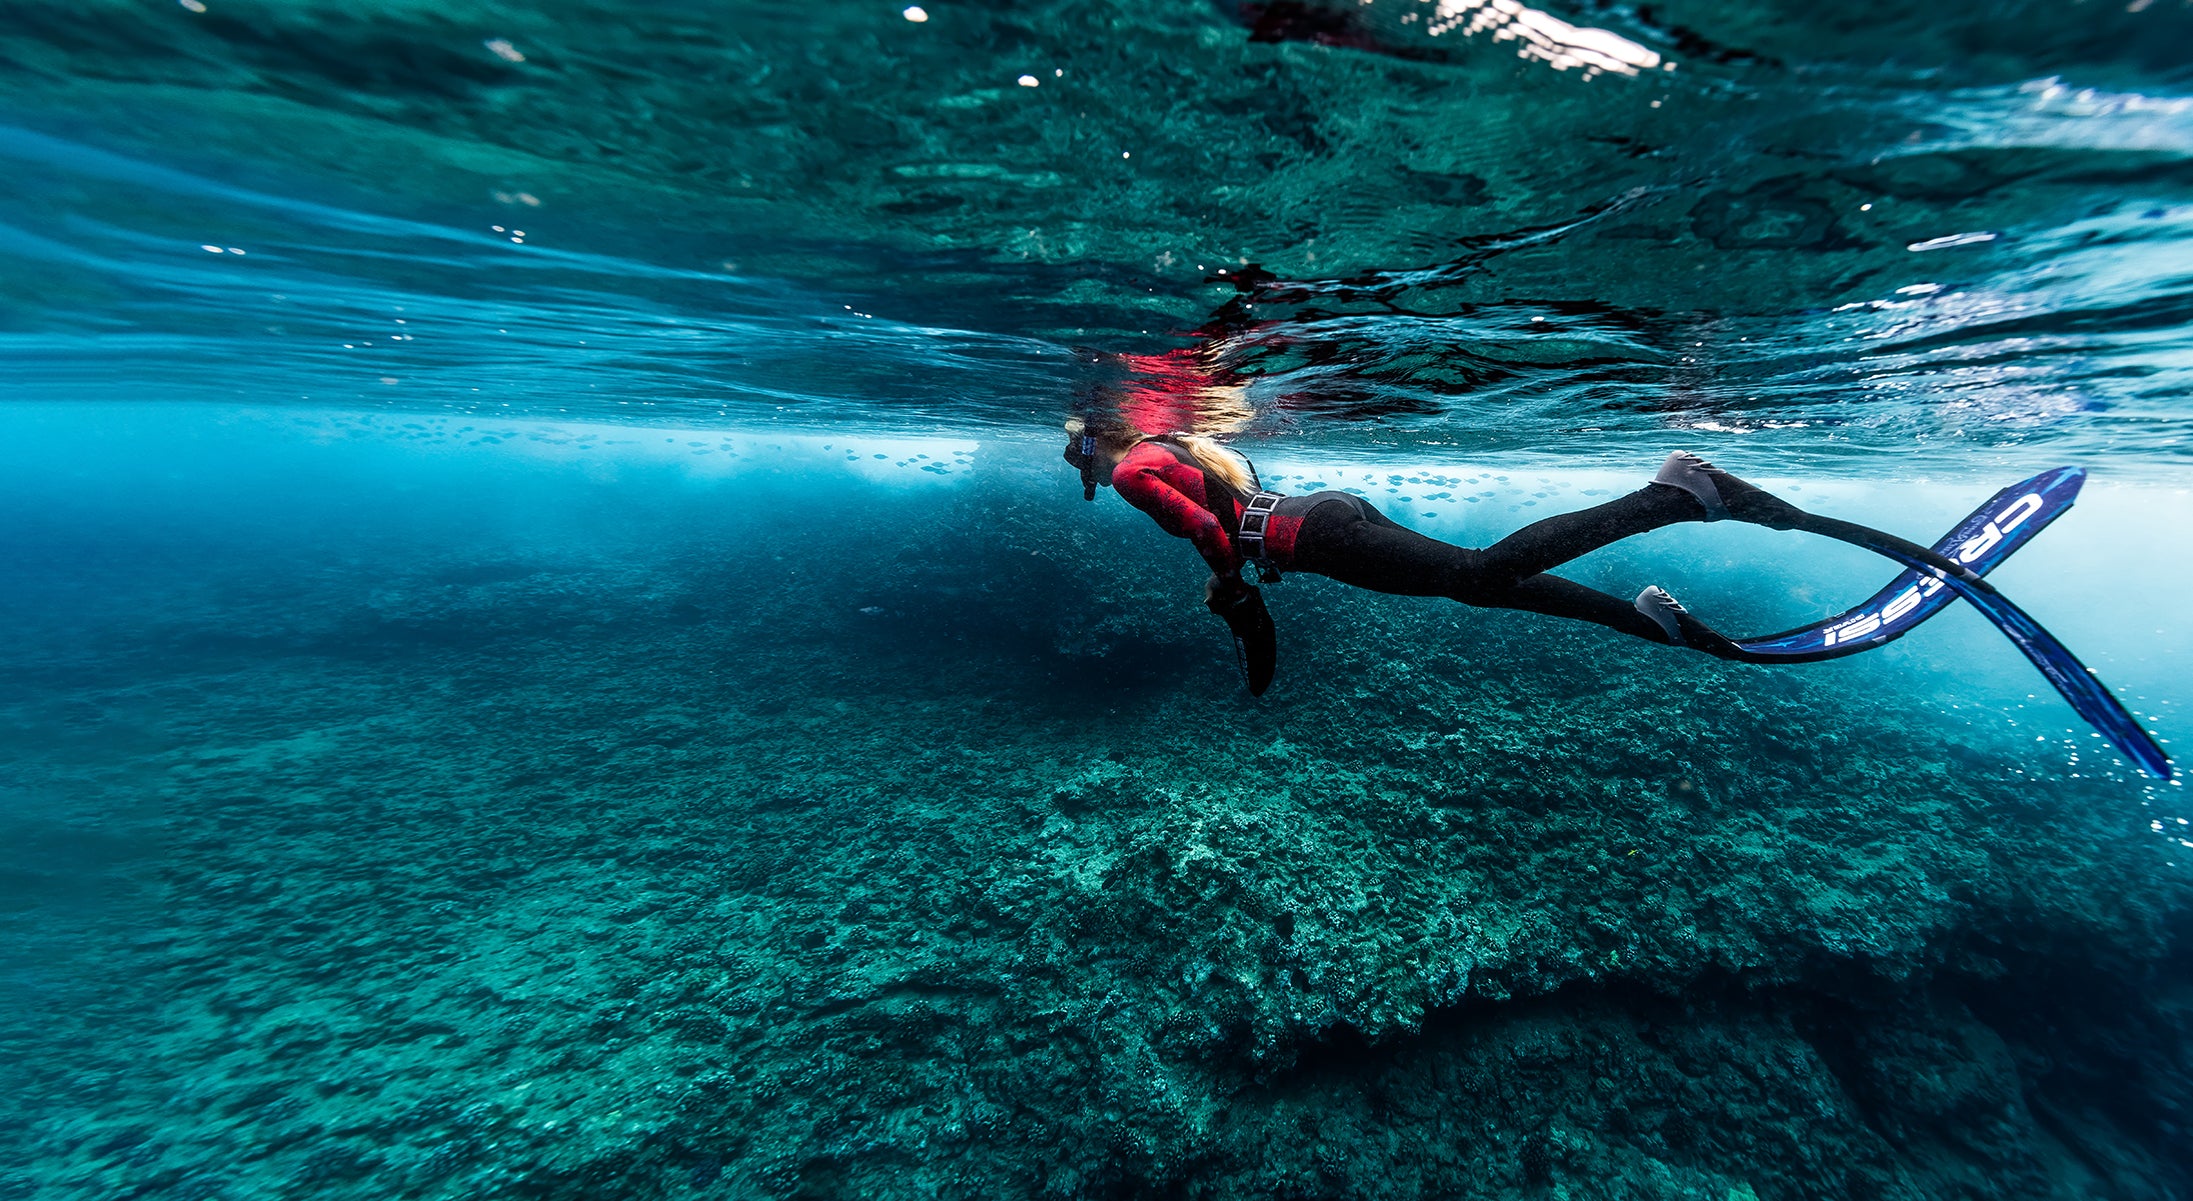 Shop Surfing and Dive Wetsuits and Accessories for Men, Women, and Youth